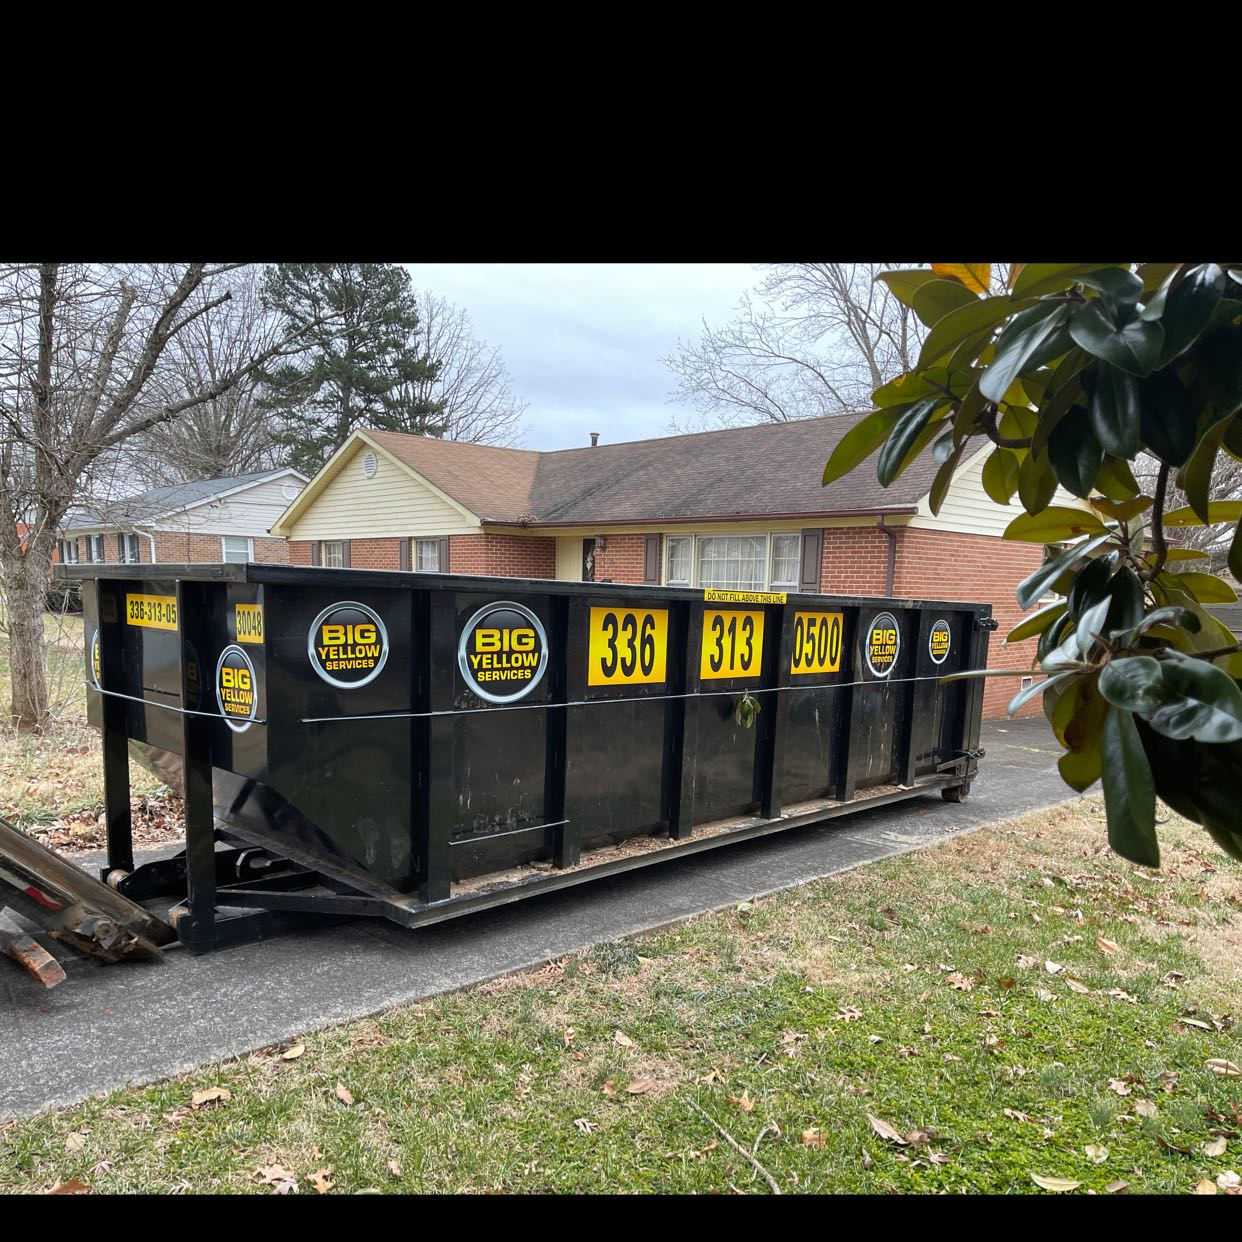 as93vdk13nbsigv7fmob Terms of Use | Roll-Off Dumpster and Portable Toilet Rentals | Big Yellow Services, LLC